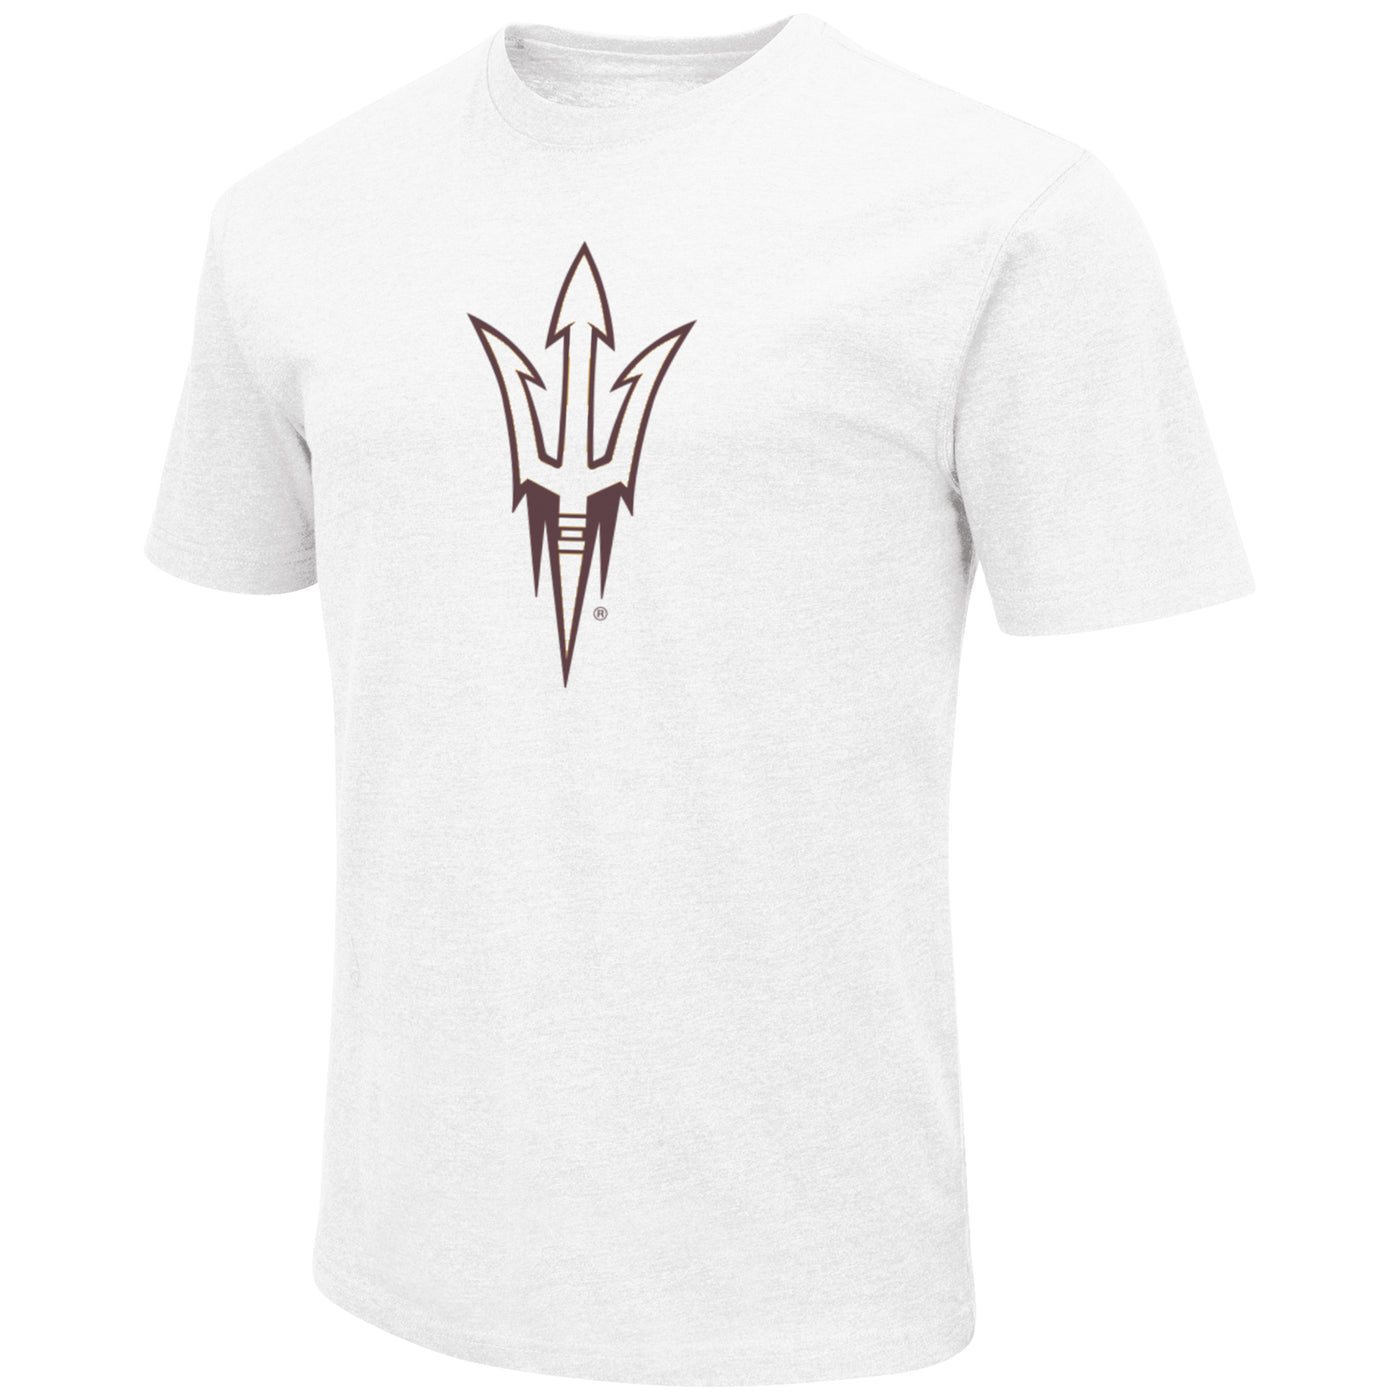 White ASU tee with maroon pitchfork outline on the chest. 